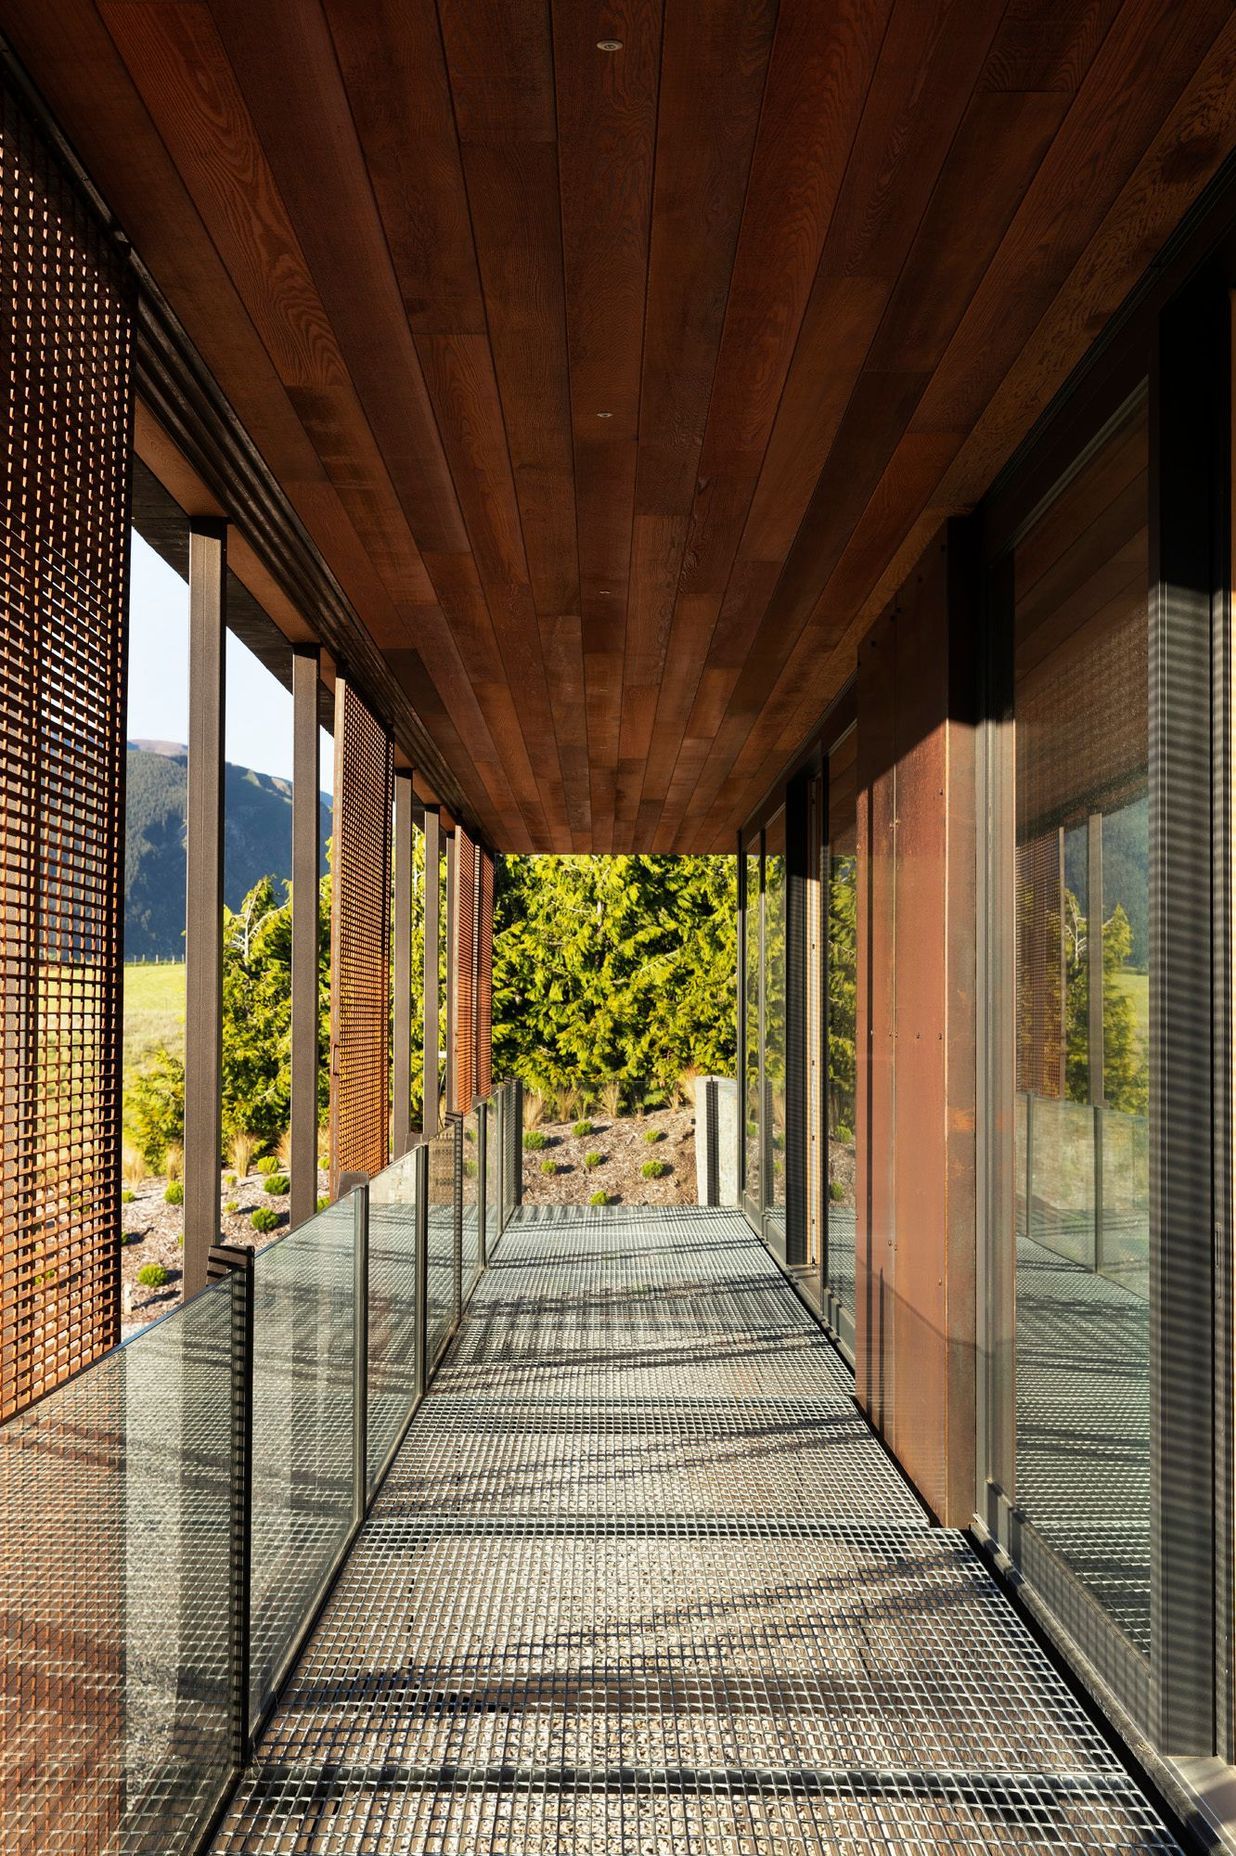 Steel and glazing in the veranda/walkway are softened by a cedar-clad soffit.